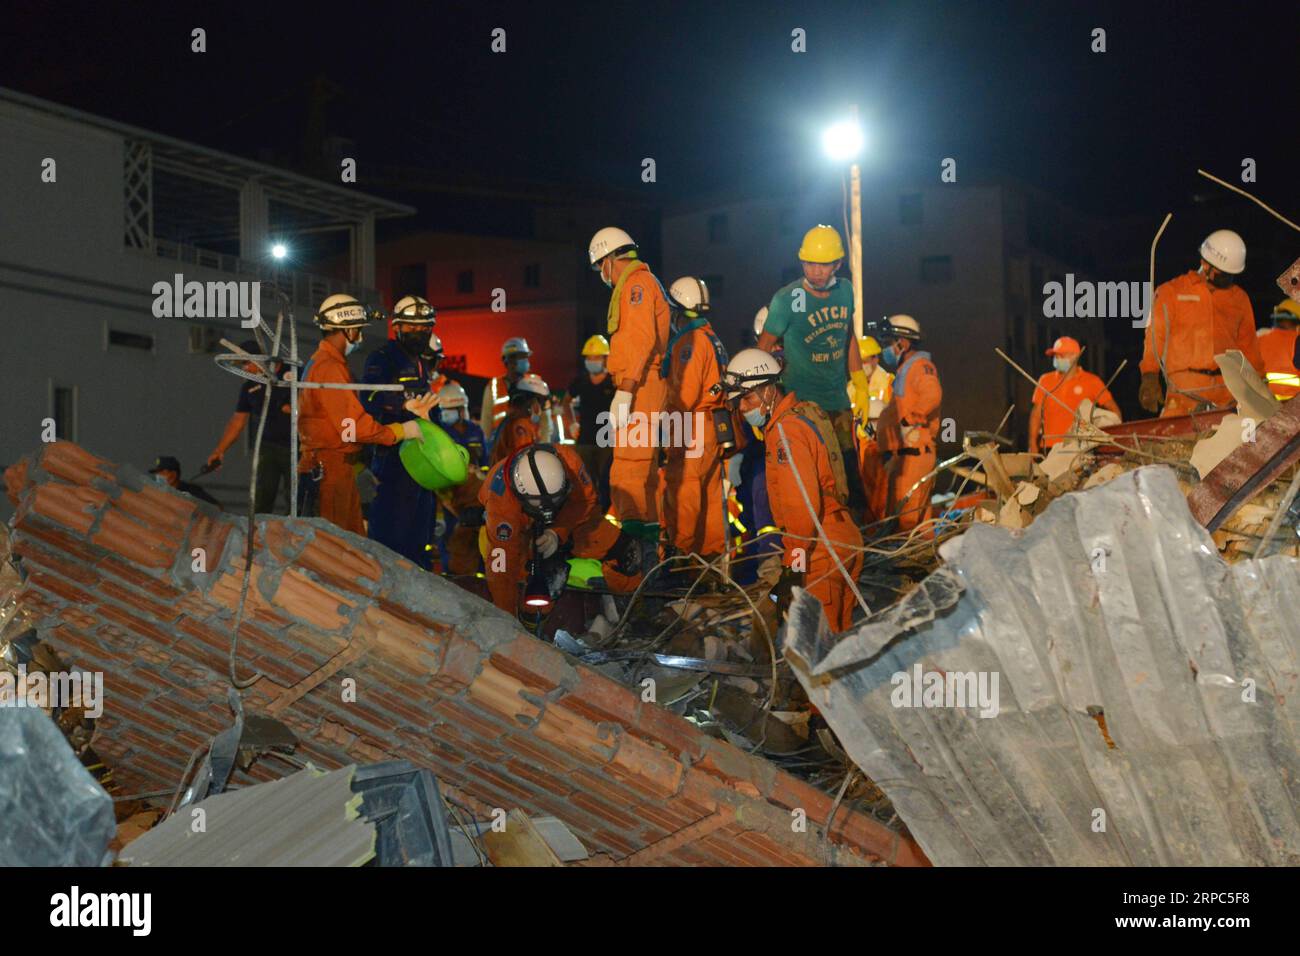 (190624) -- PHNOM PENH, June 24, 2019 -- Rescuers search for trapped people in a collapsed building in Sihanoukville city in Preah Sihanouk province, Cambodia on June 24, 2019. The death toll in the collapse of a seven-story under-construction building in southwestern Cambodia s Preah Sihanouk Province early Saturday, has risen to 25, according to the latest report released by the rescue team on Monday. ) CAMBODIA-ACCIDENT-BUILDING COLLAPSE LixLay PUBLICATIONxNOTxINxCHN Stock Photo